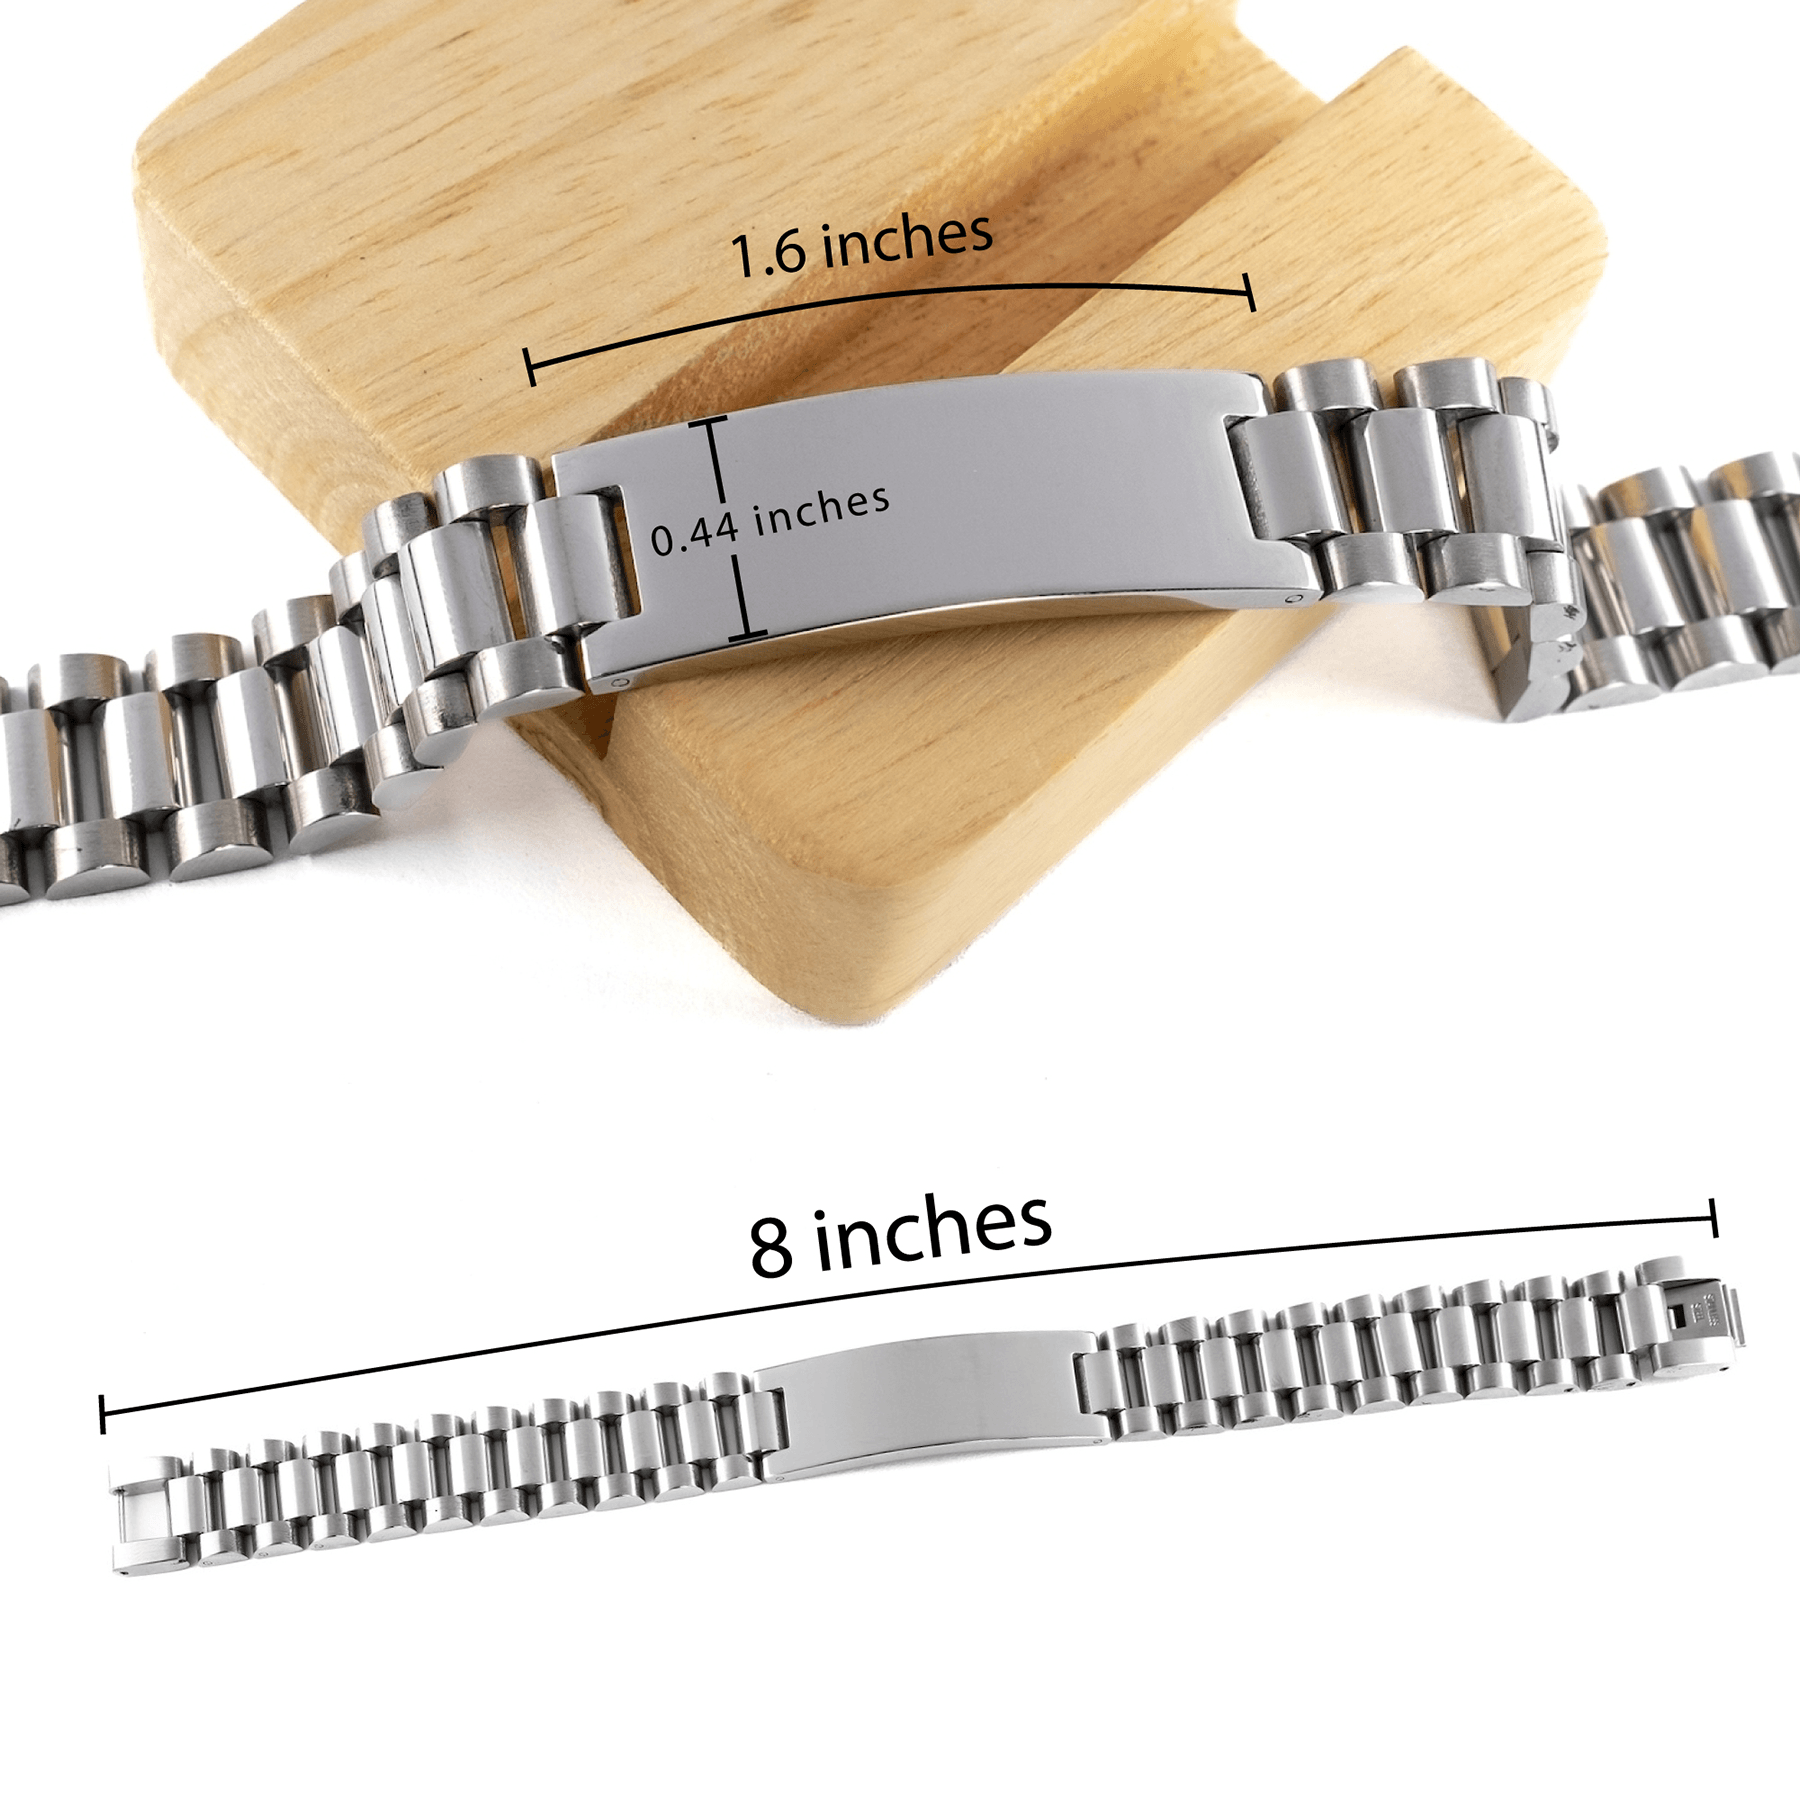 Dental Hygienist Ladder Stainless Steel Engraved Bracelet - Thanks for being who you are - Birthday Christmas Jewelry Gifts Coworkers Colleague Boss - Mallard Moon Gift Shop